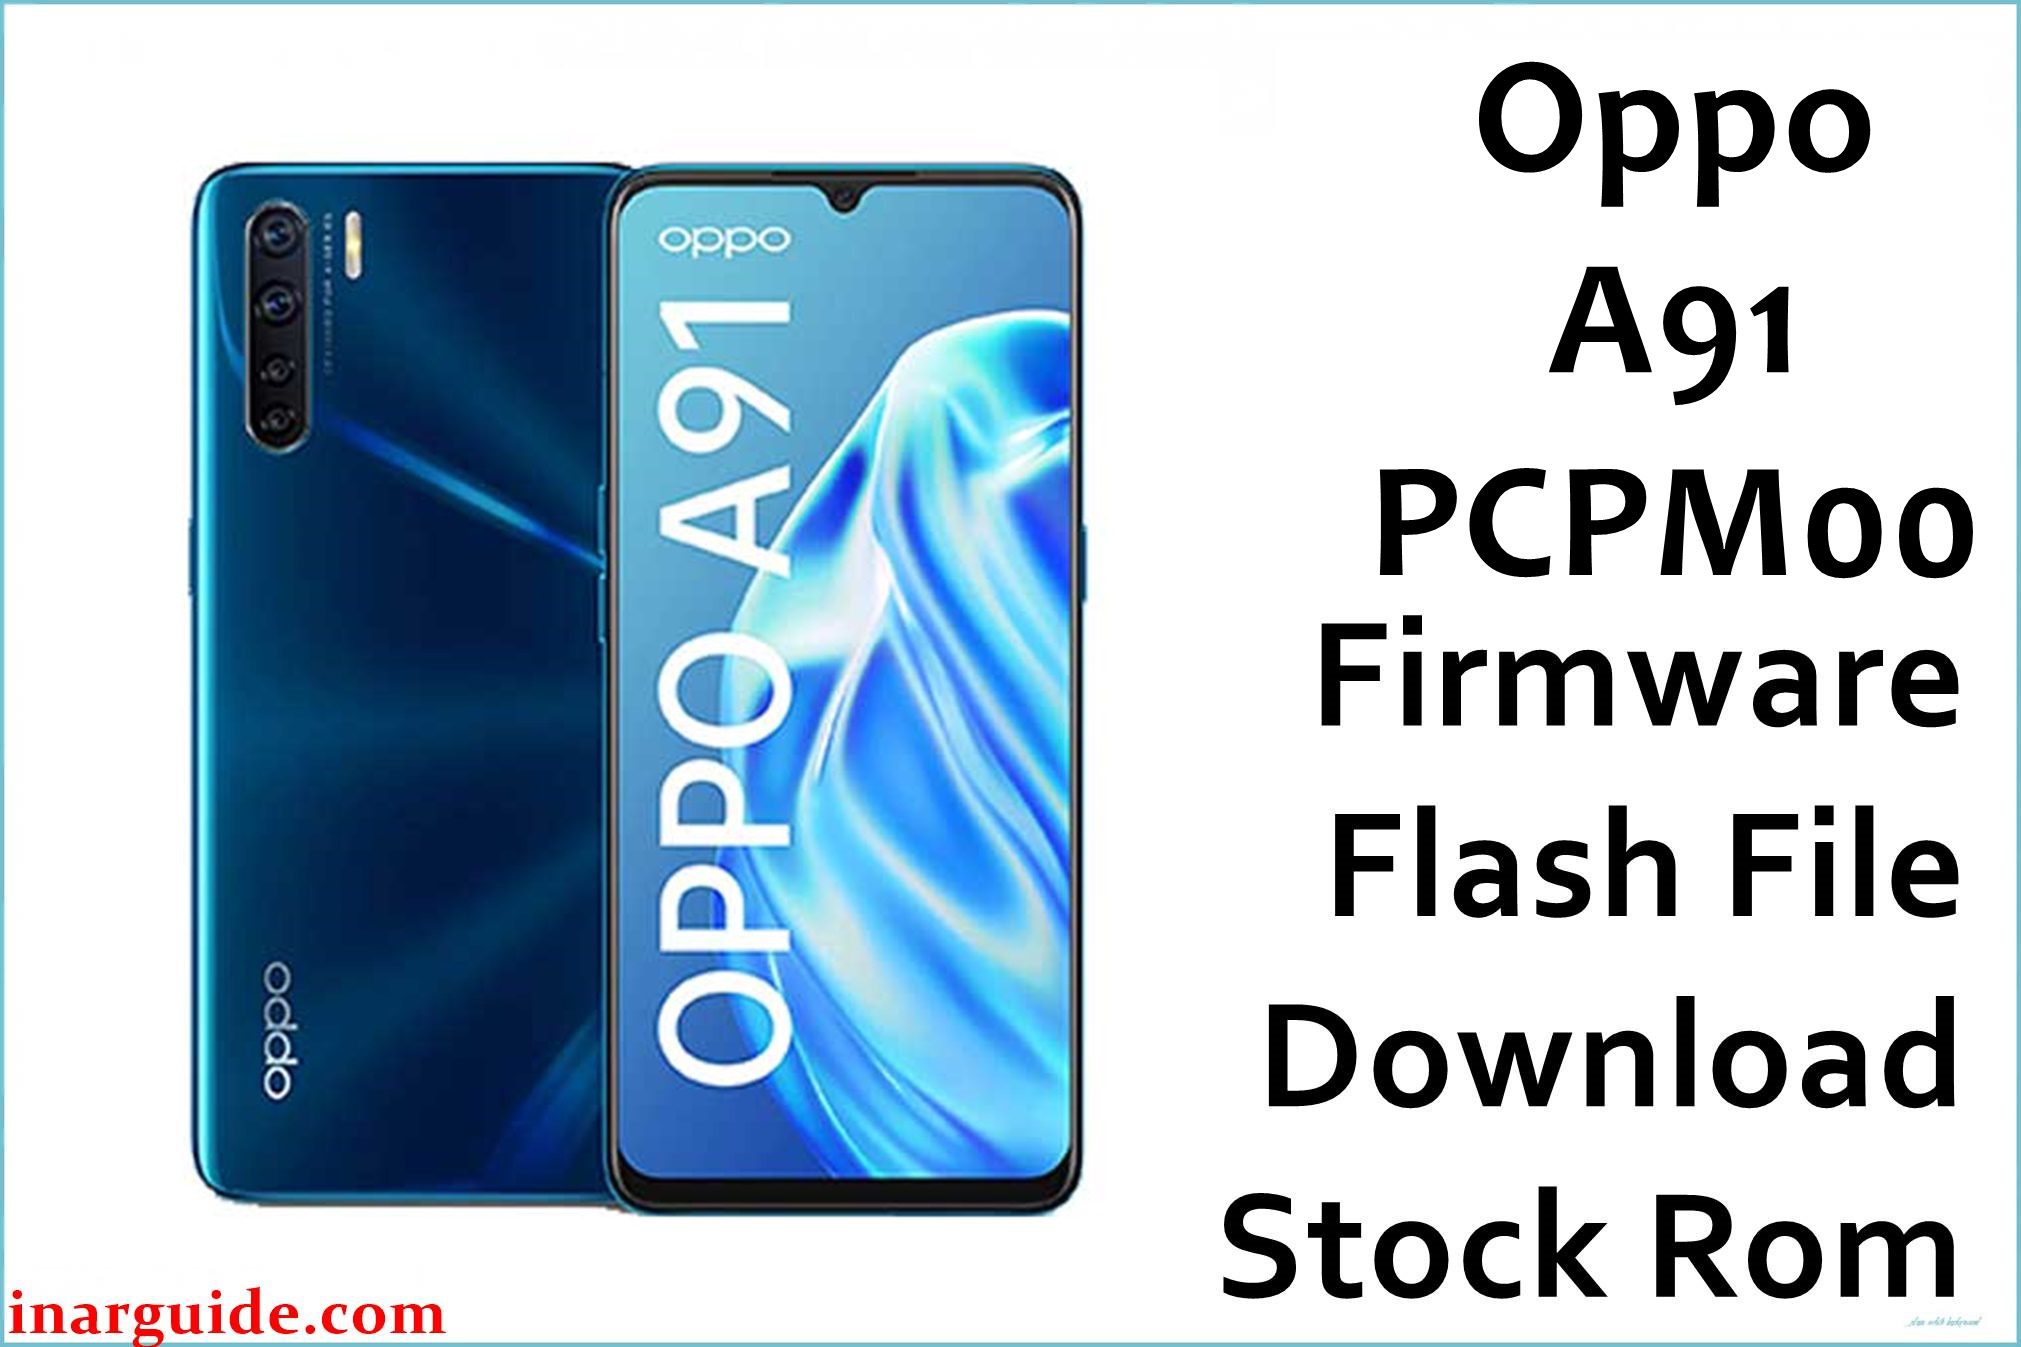 Oppo A91 PCPM00